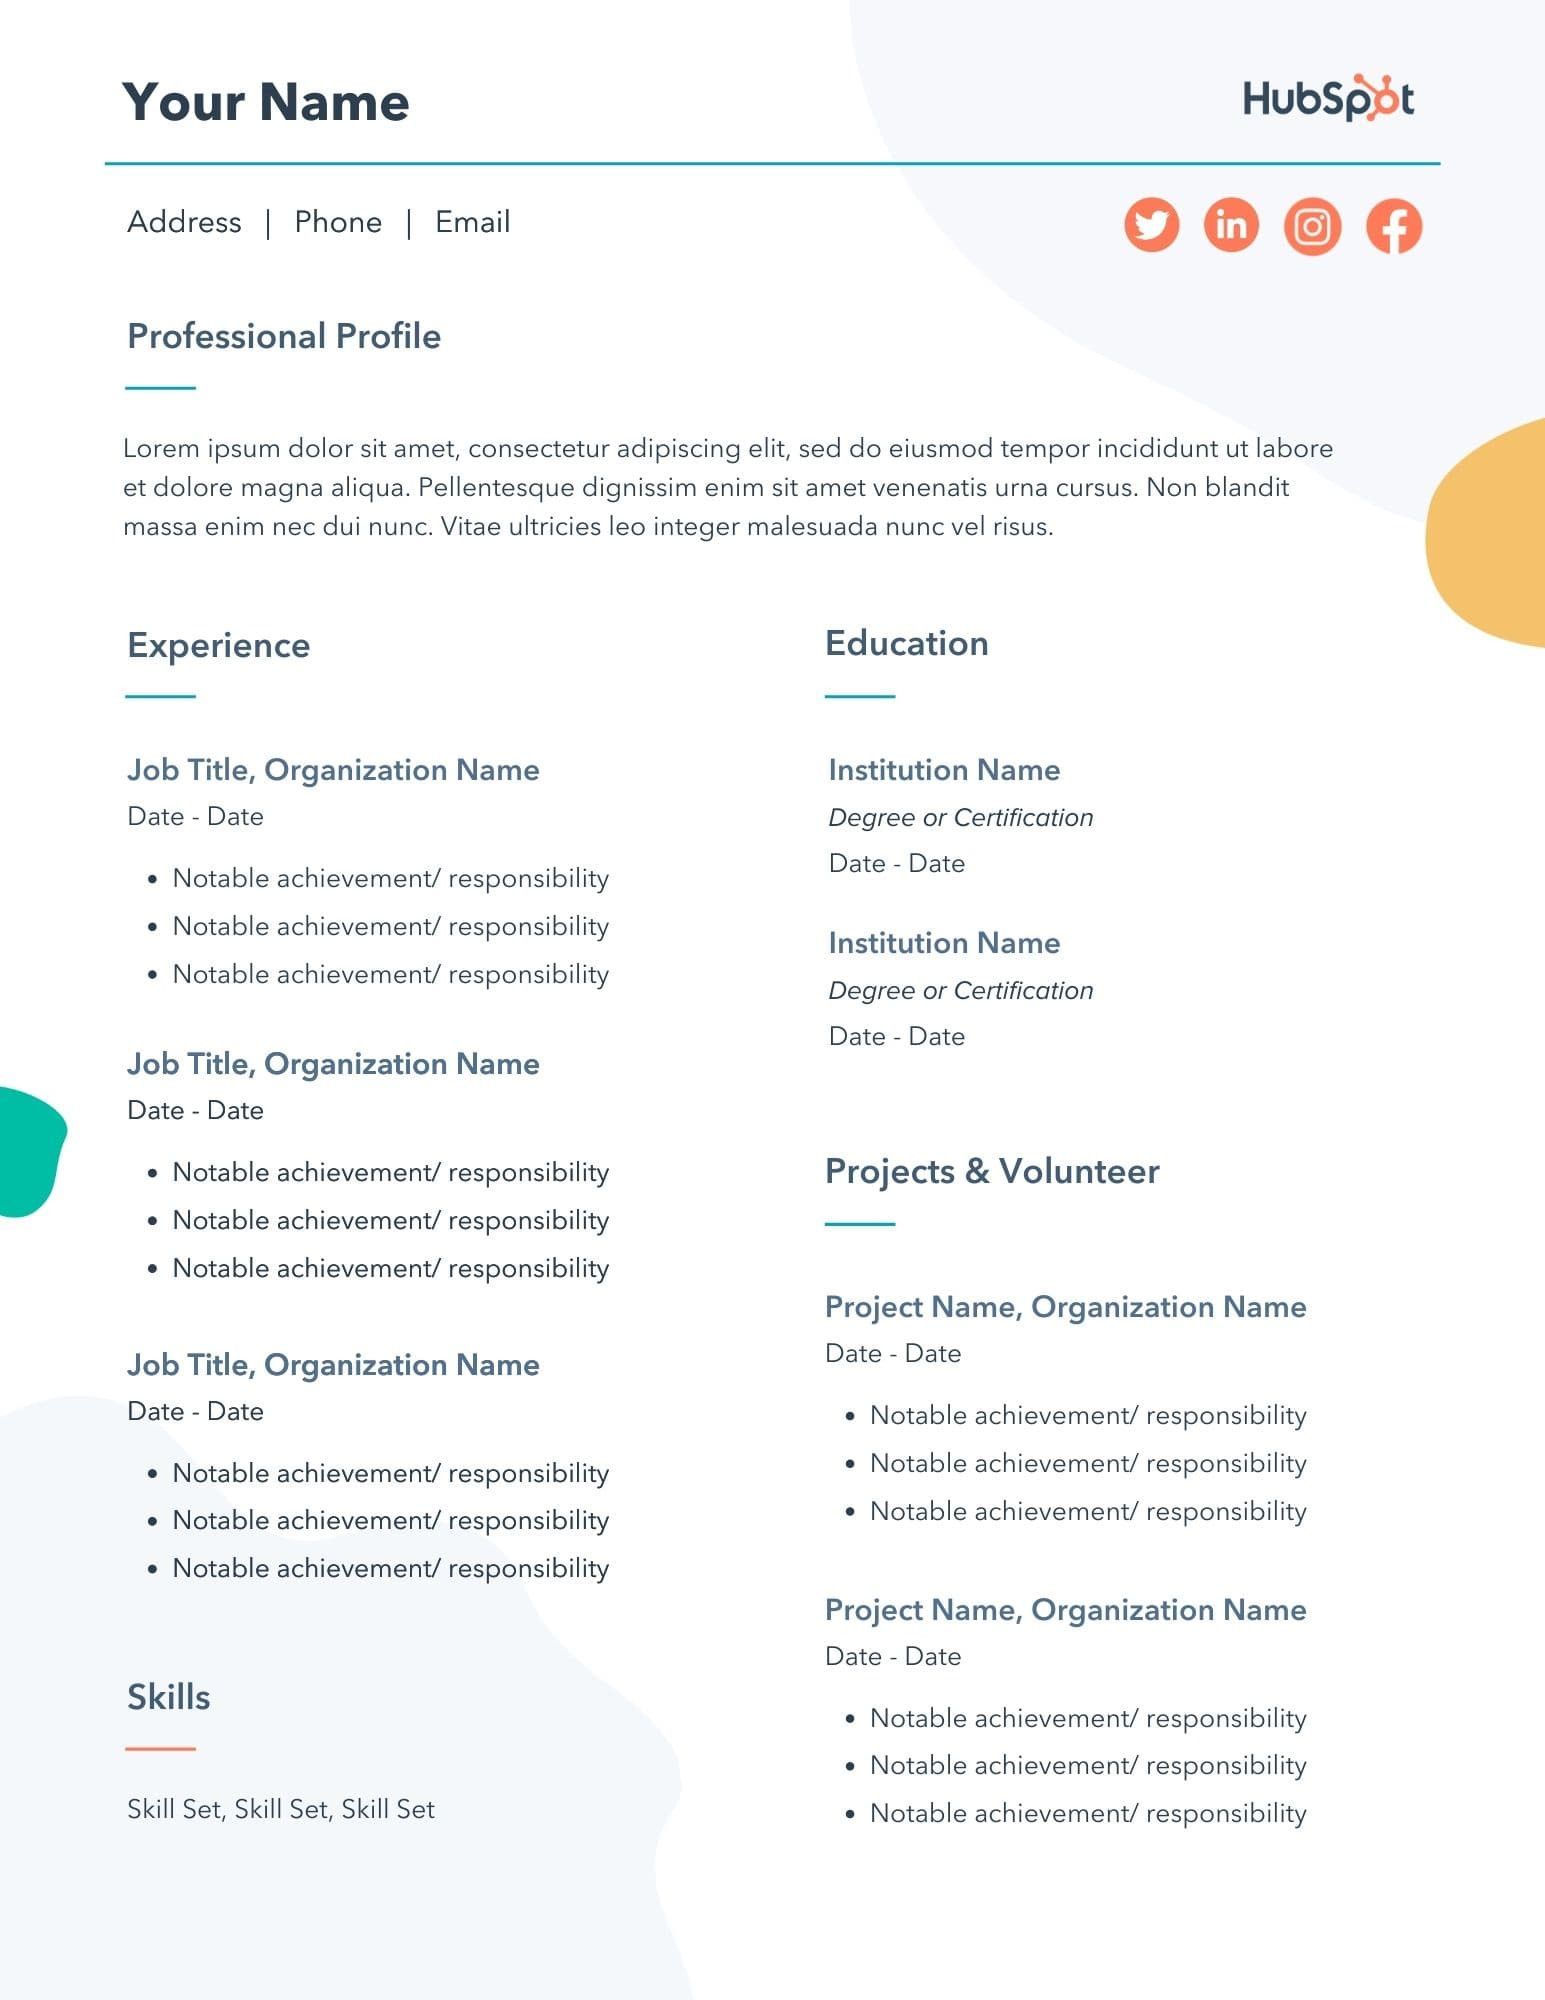 Sample Resume Template for Experienced Candidate 29 Free Resume Templates for Microsoft Word (& How to Make Your Own)